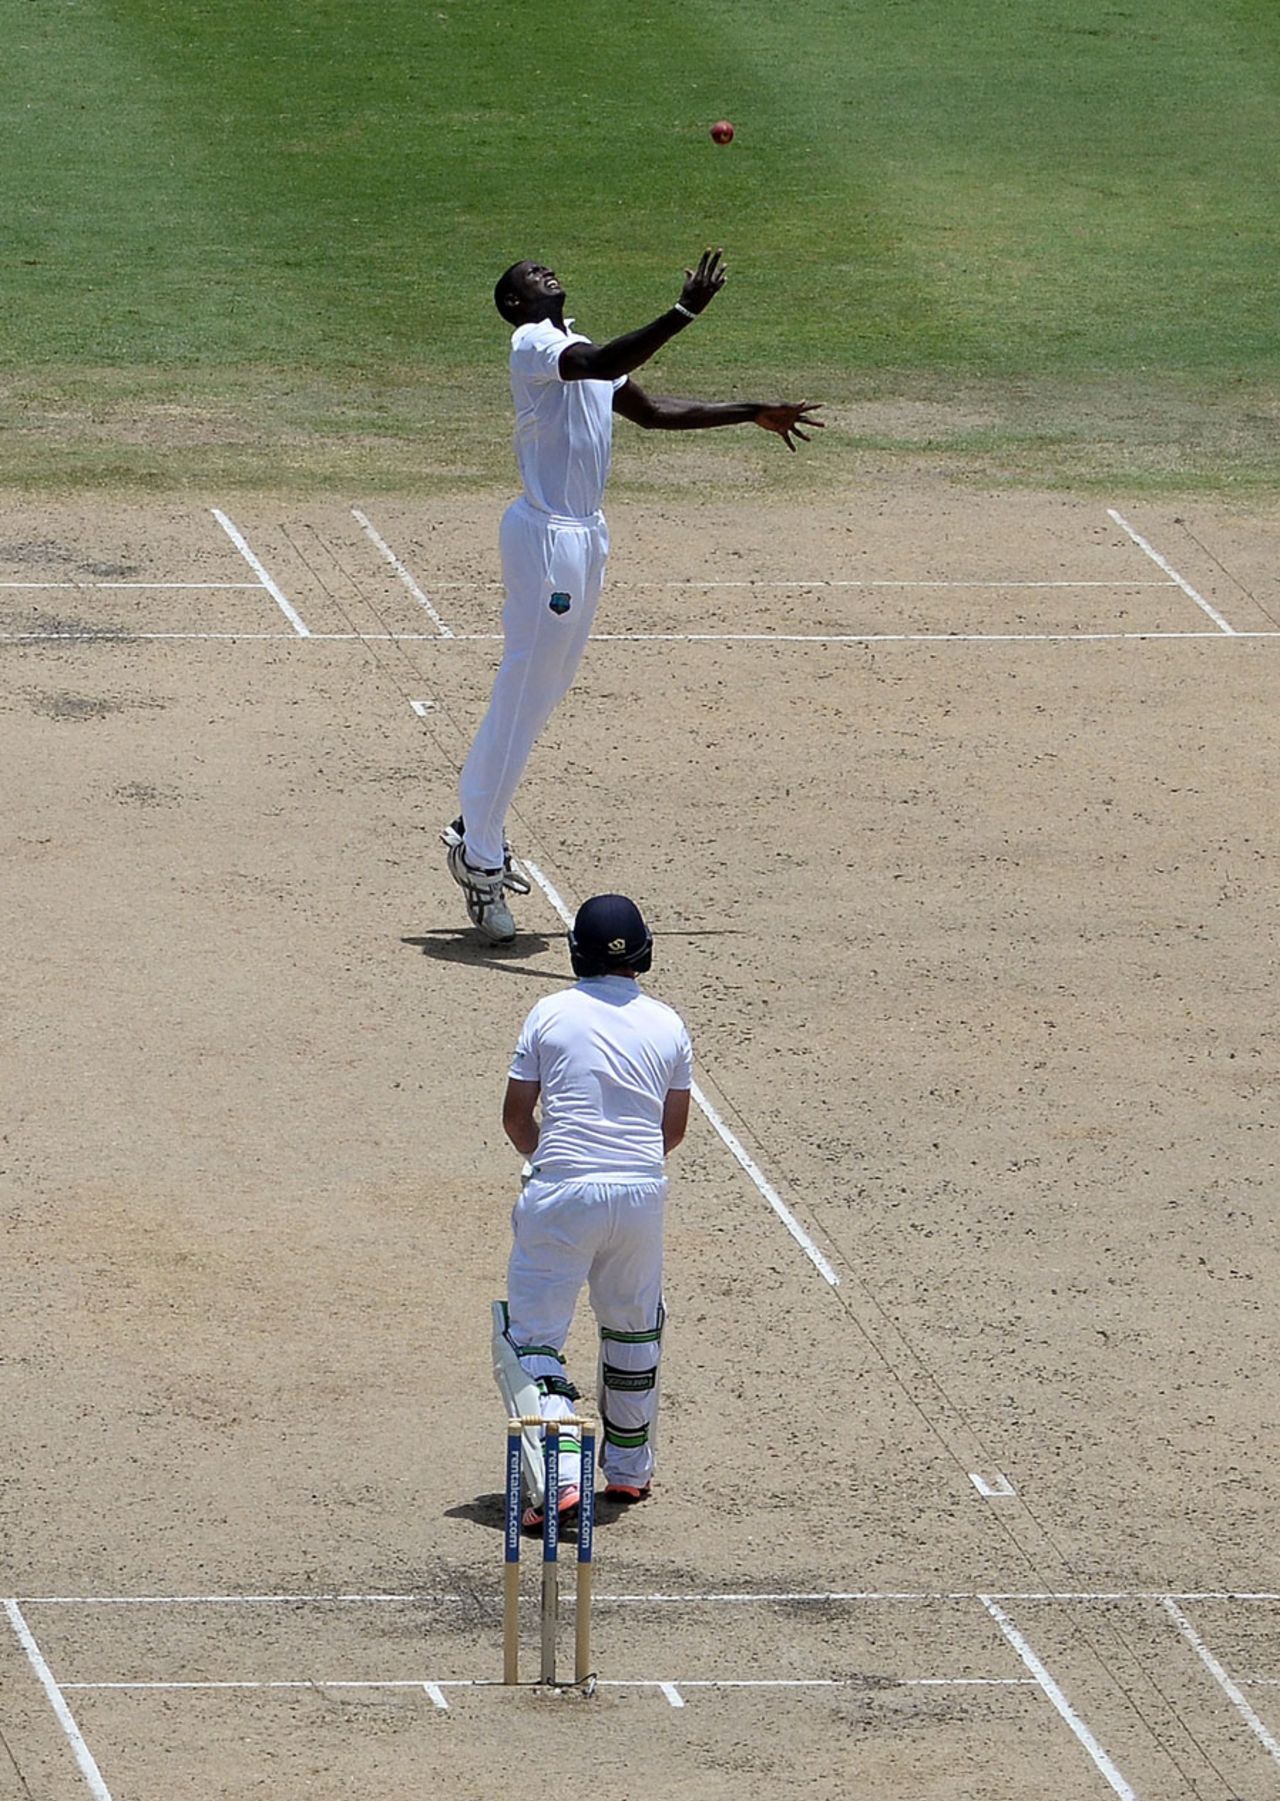 Jason Holder celebrates catching Ian Bell off his own bowling, West Indies v England, 3rd Test, Bridgetown, 1st day, May 1, 2015